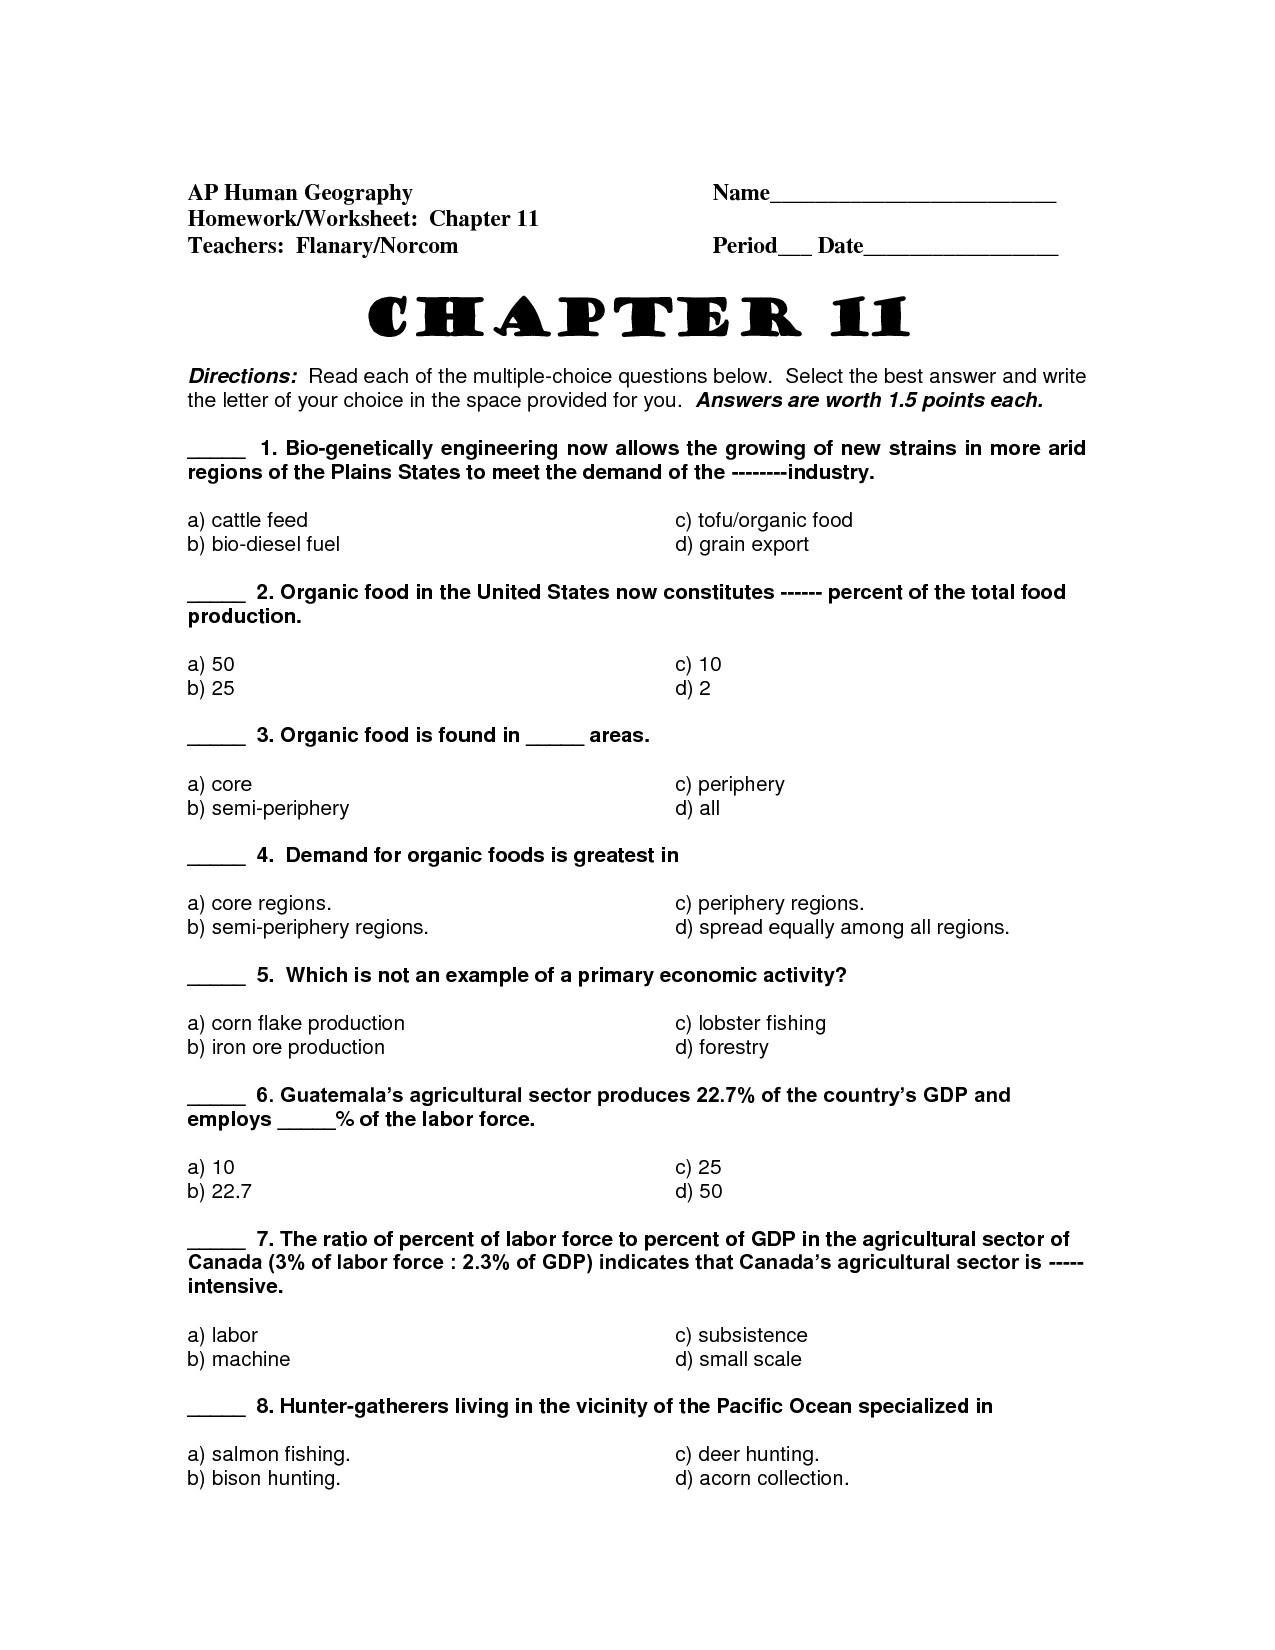 AP Human Geography Chapter 7 Worksheet Answers